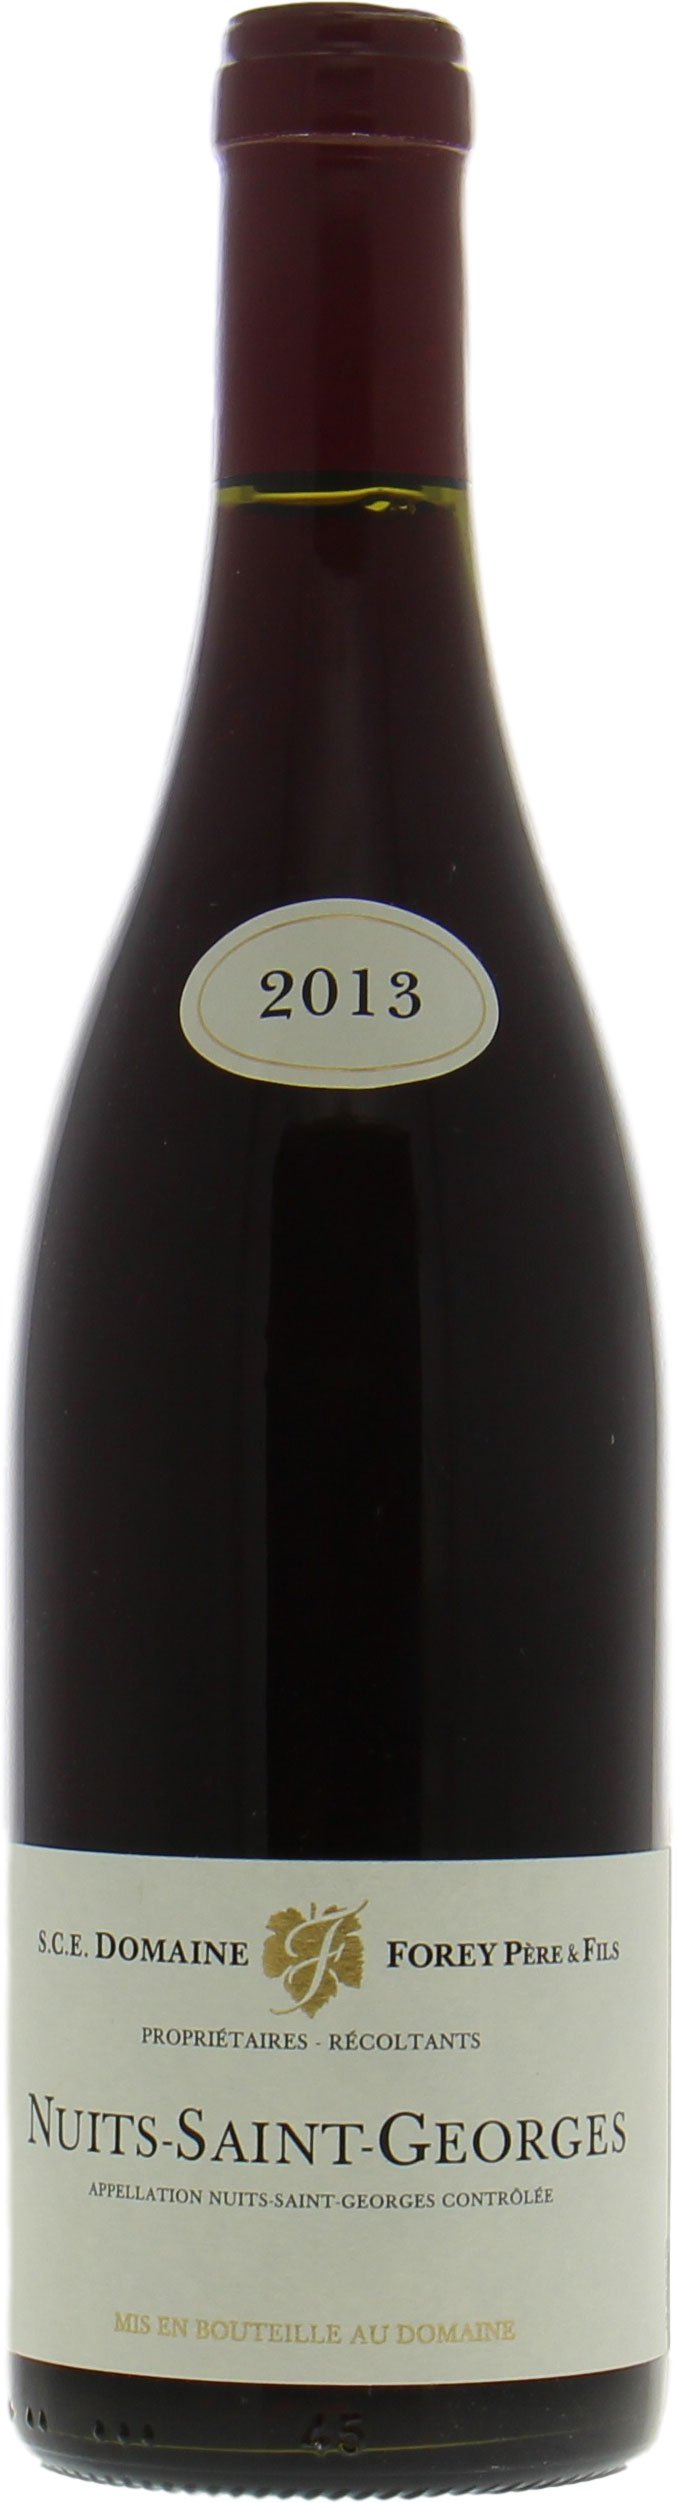 Domaine Forey Pere & Fils - Nuits St. Georges 2013 Perfect